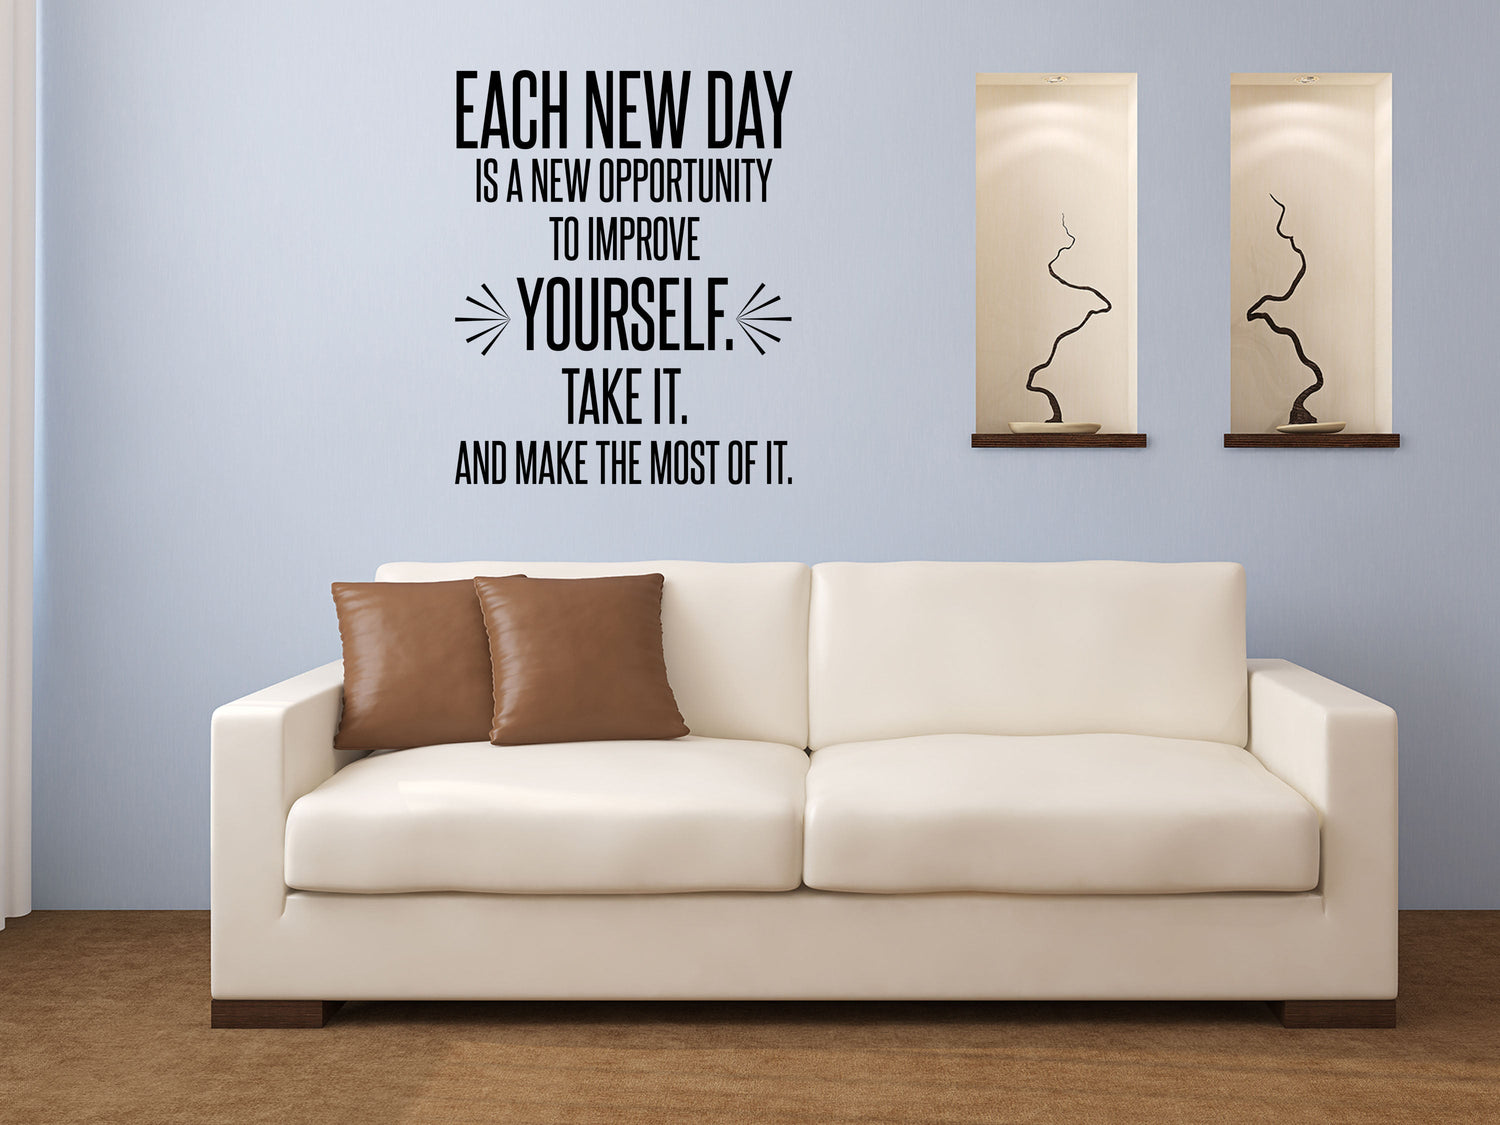 Teamwork Wall Decal - Office Wall Quote - Classroom Wall Quote - Motivational Fitness Inspiration Decal Quotes - Sticker Living Room Wall Vinyl Wall Decal Inspirational Wall Signs 